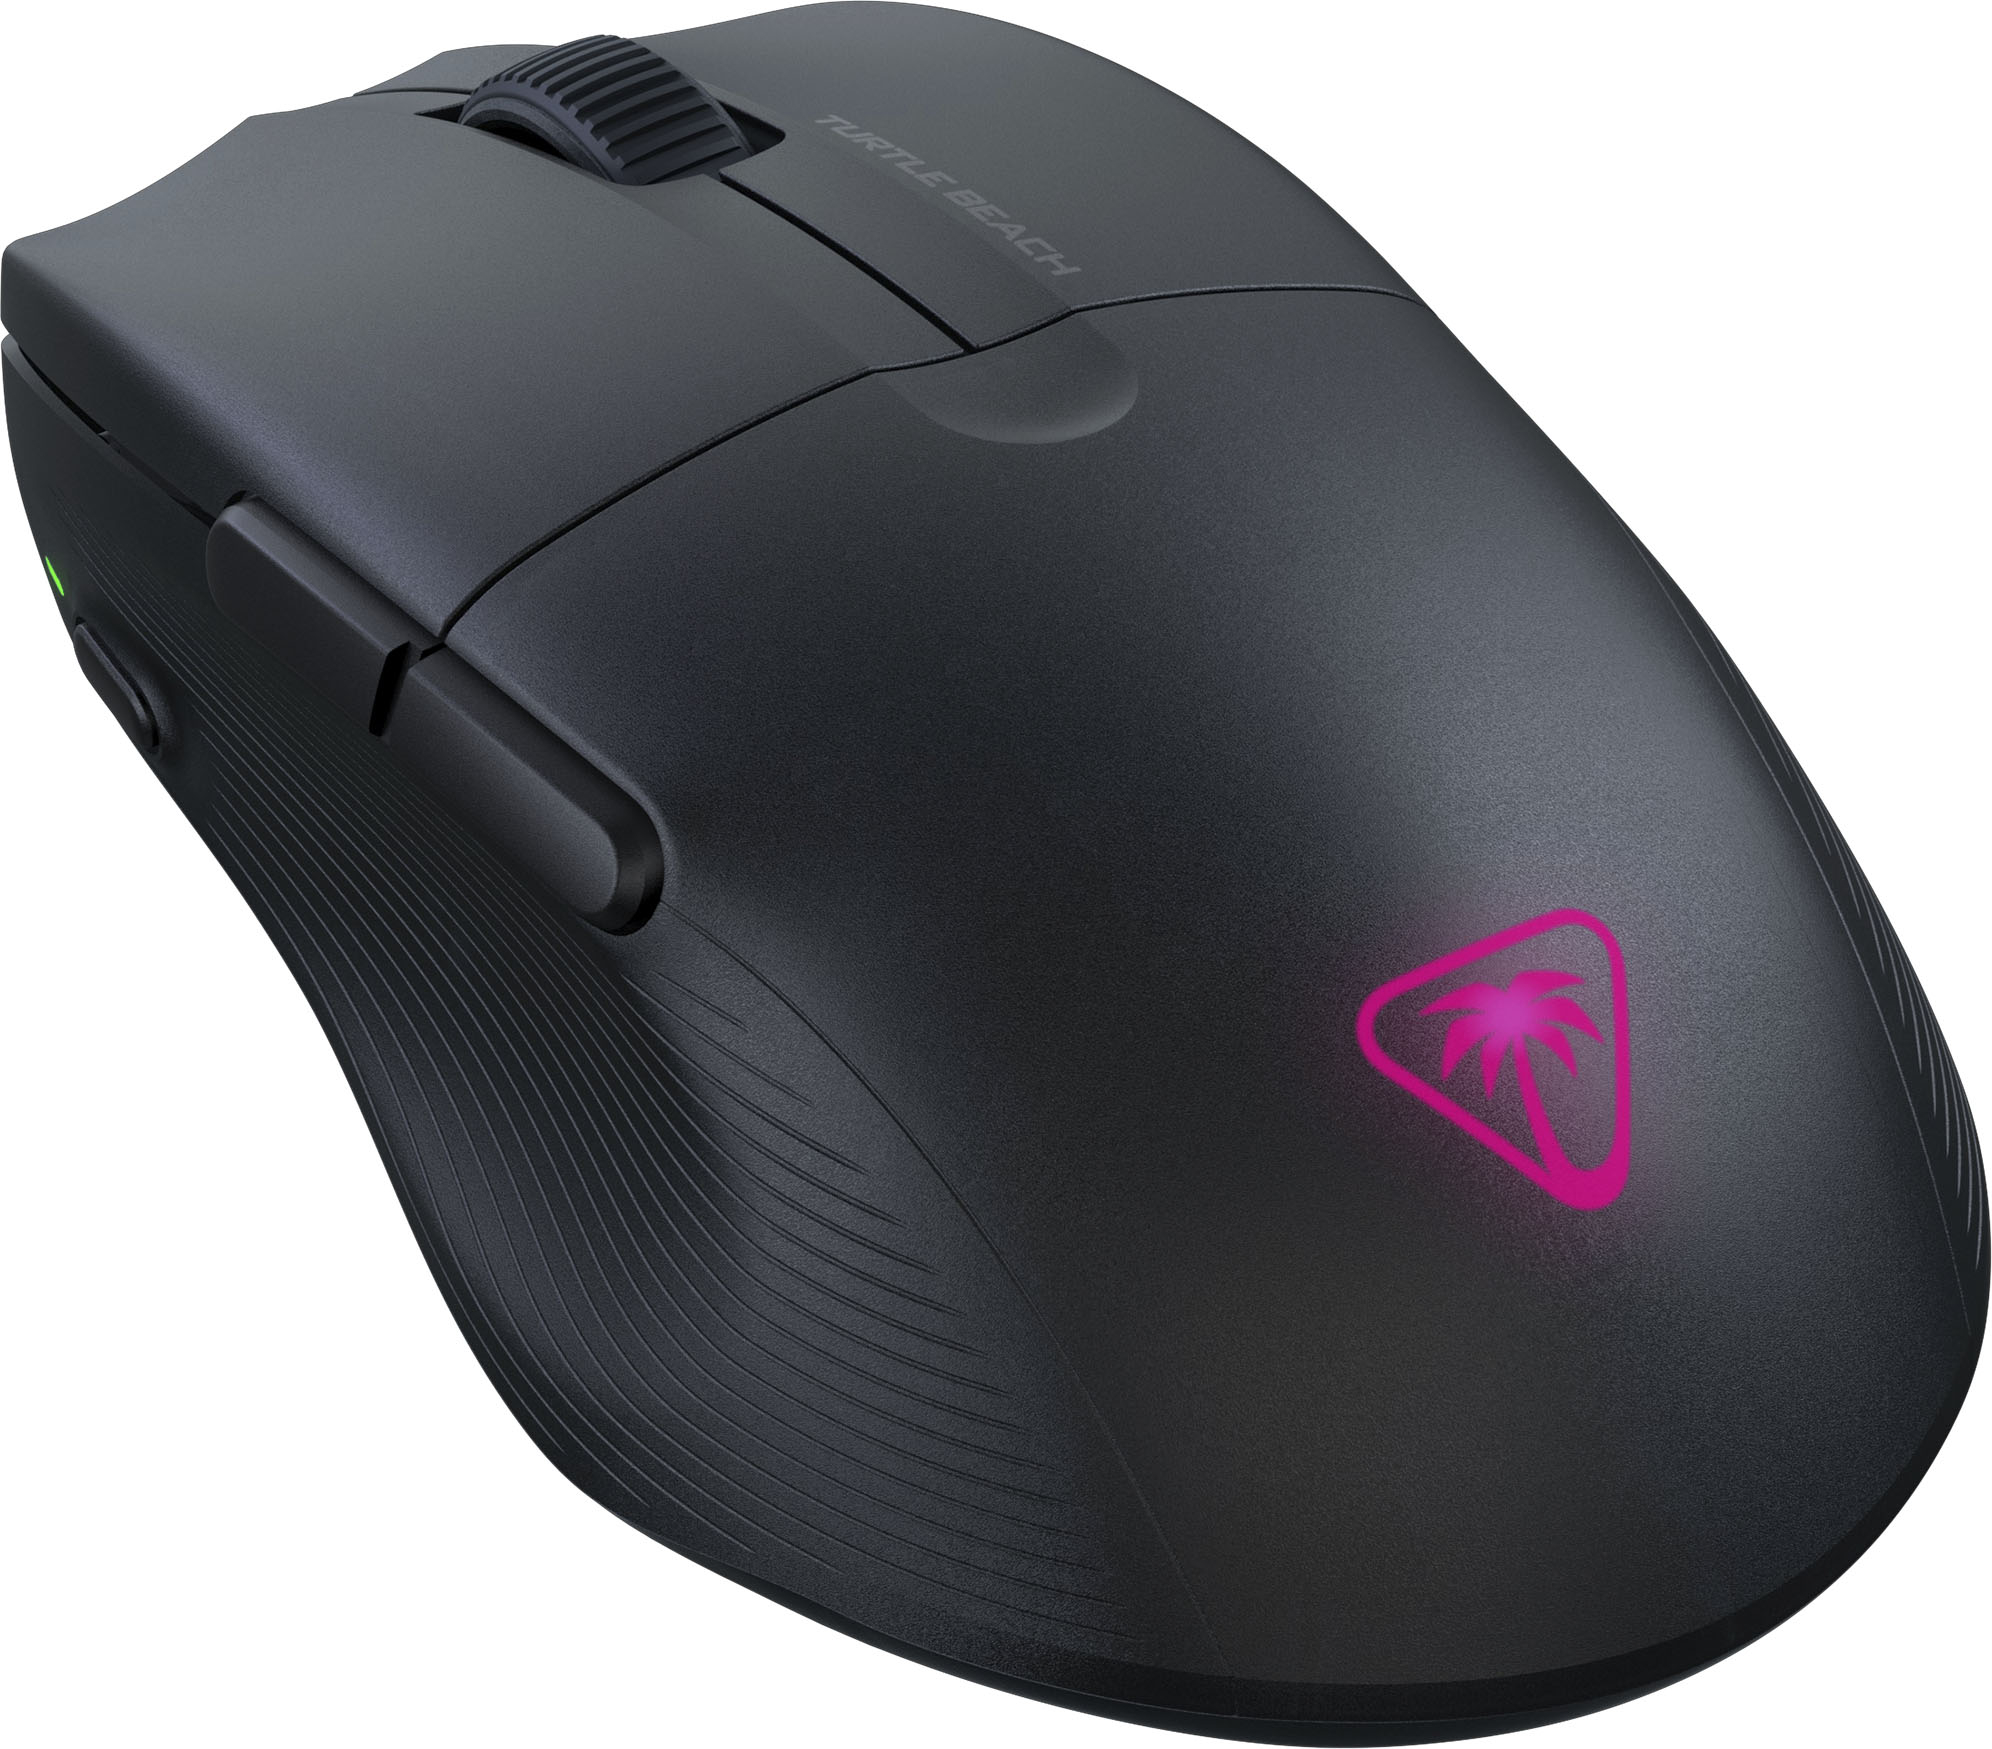 Angle View: Turtle Beach - Pure Air Ultra-Light Wireless Ergonomic RGB Gaming Mouse with 26K DPI Optical Sensor & 125 hour Battery - Black